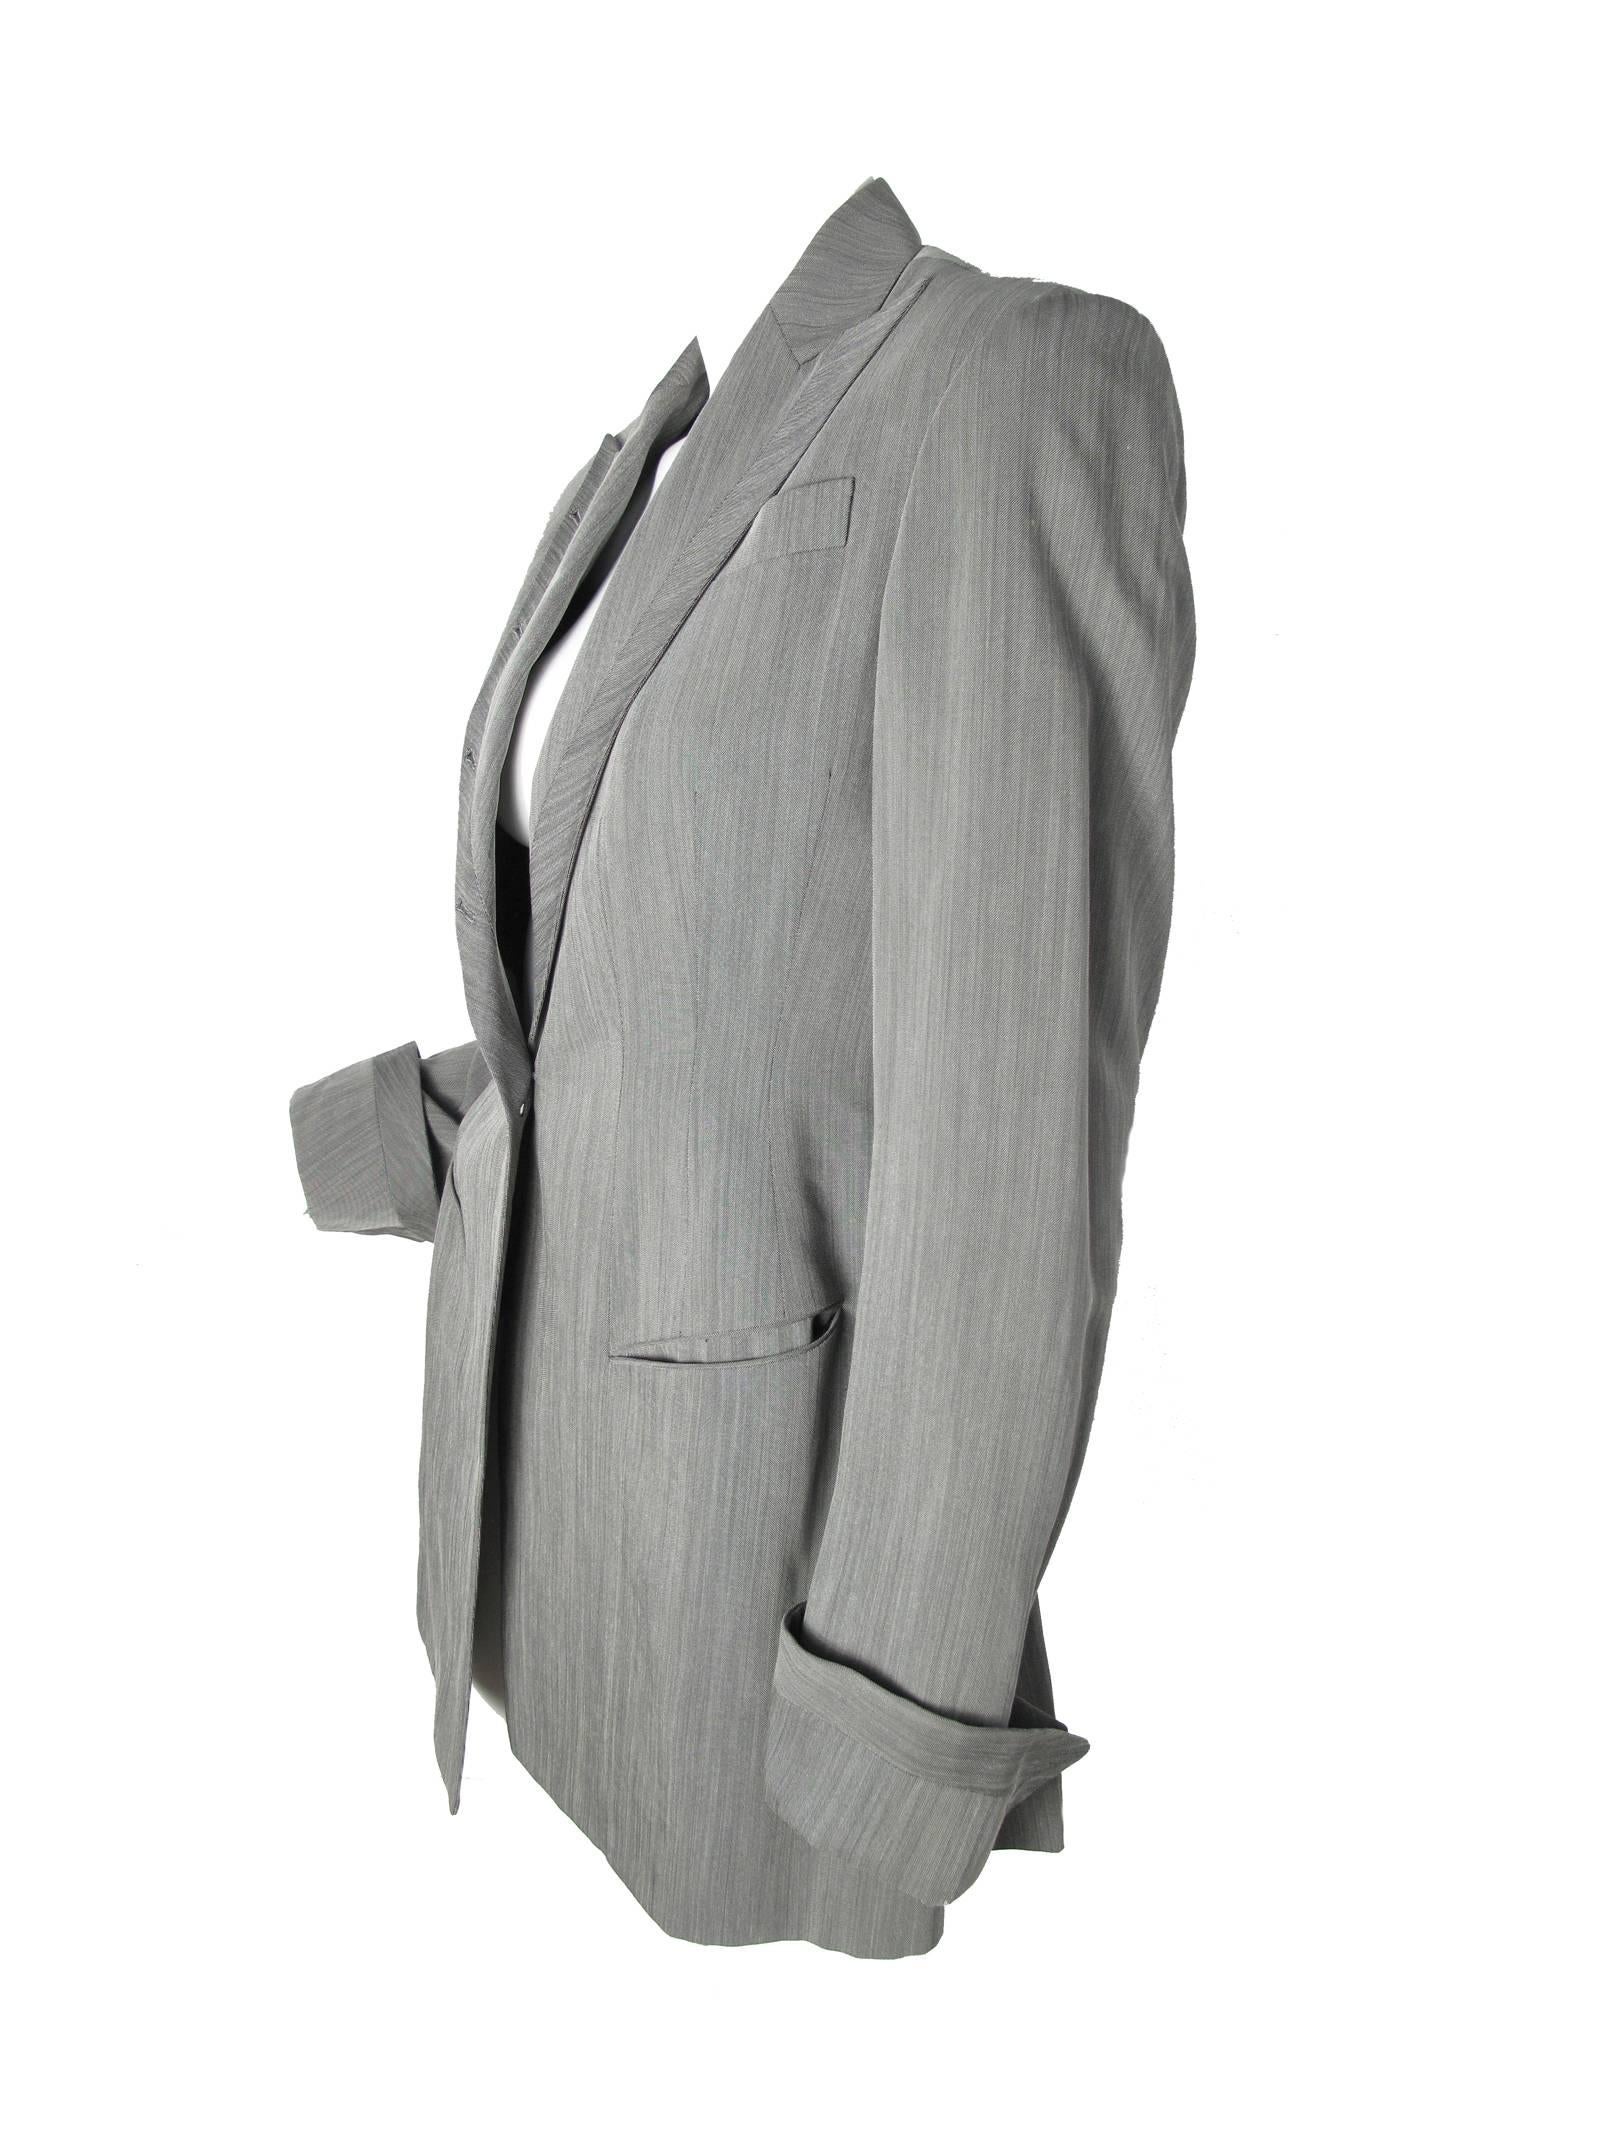 1990s Richard Tyler Suit with Button Holes up Collar   1